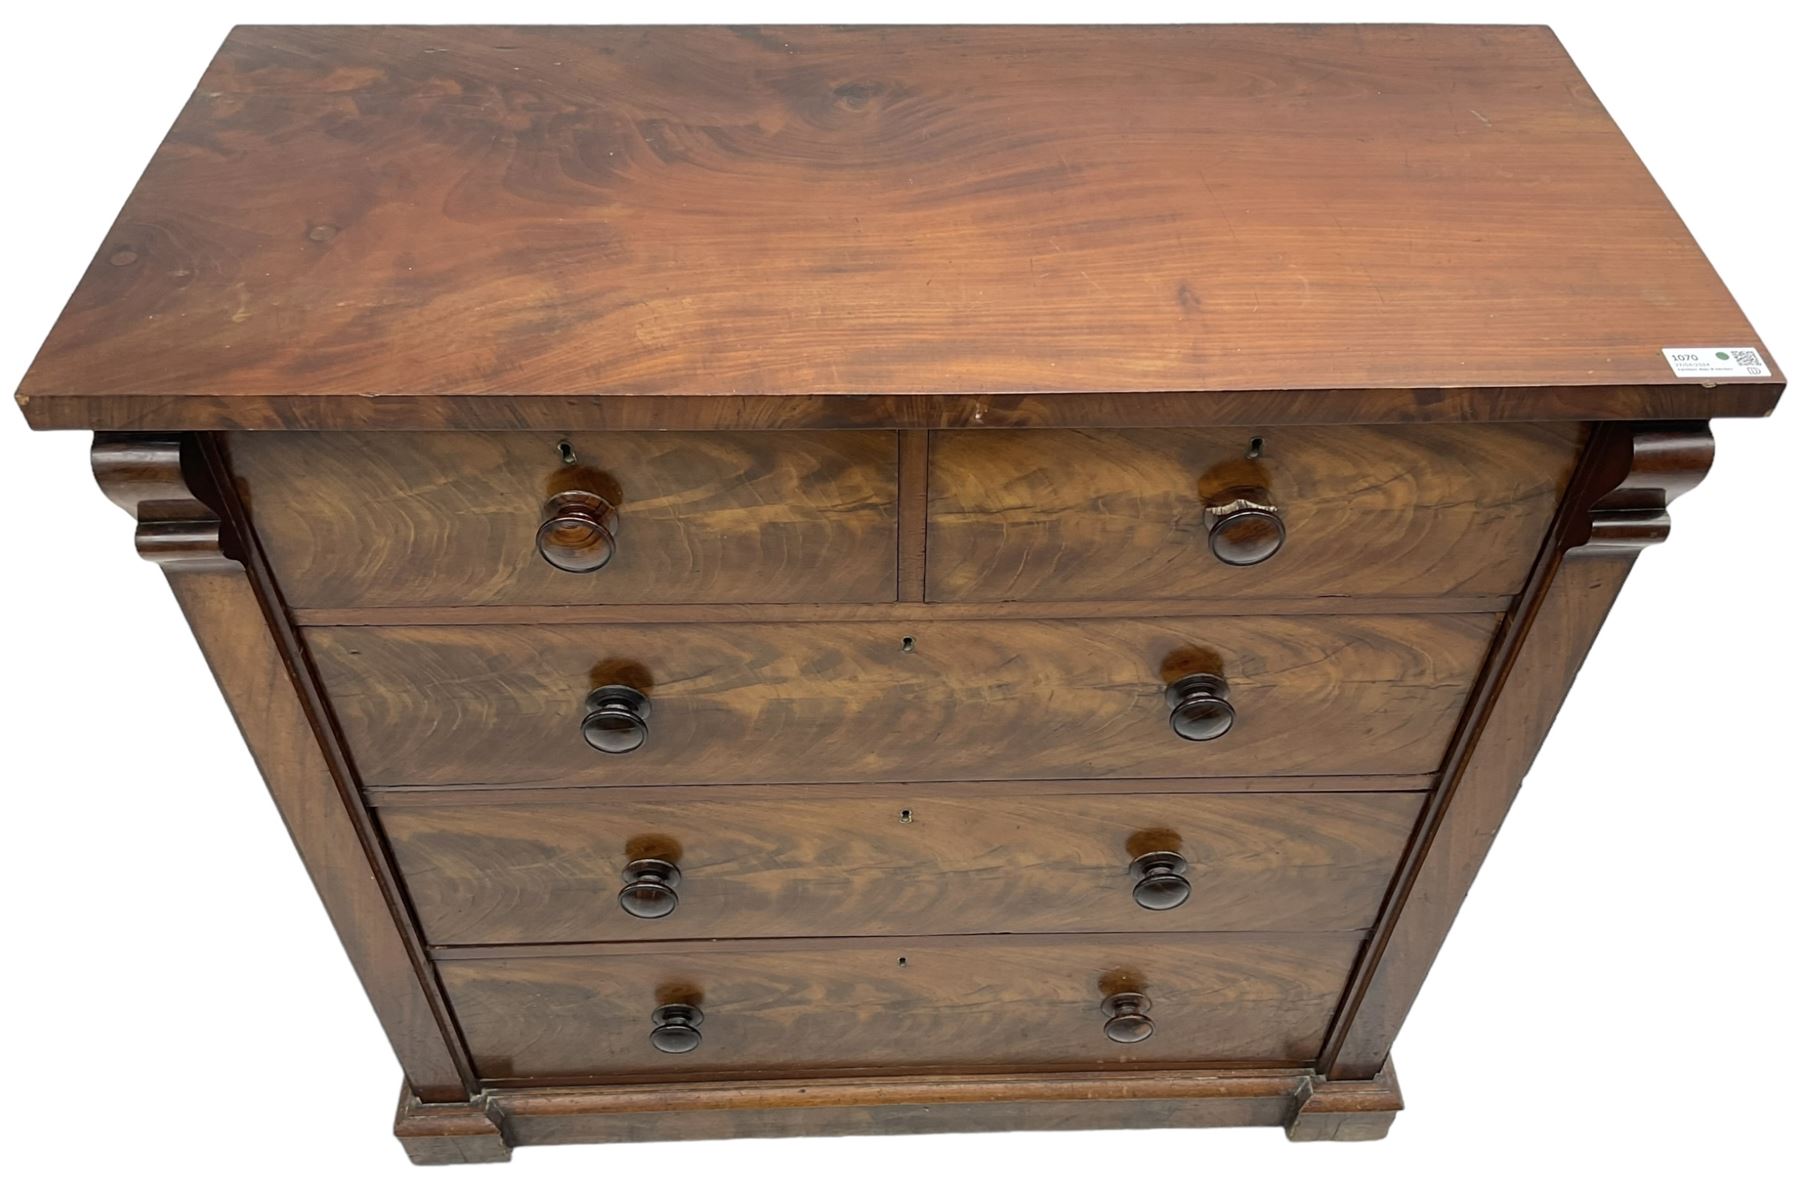 Victorian figured mahogany straight-front chest - Image 4 of 8